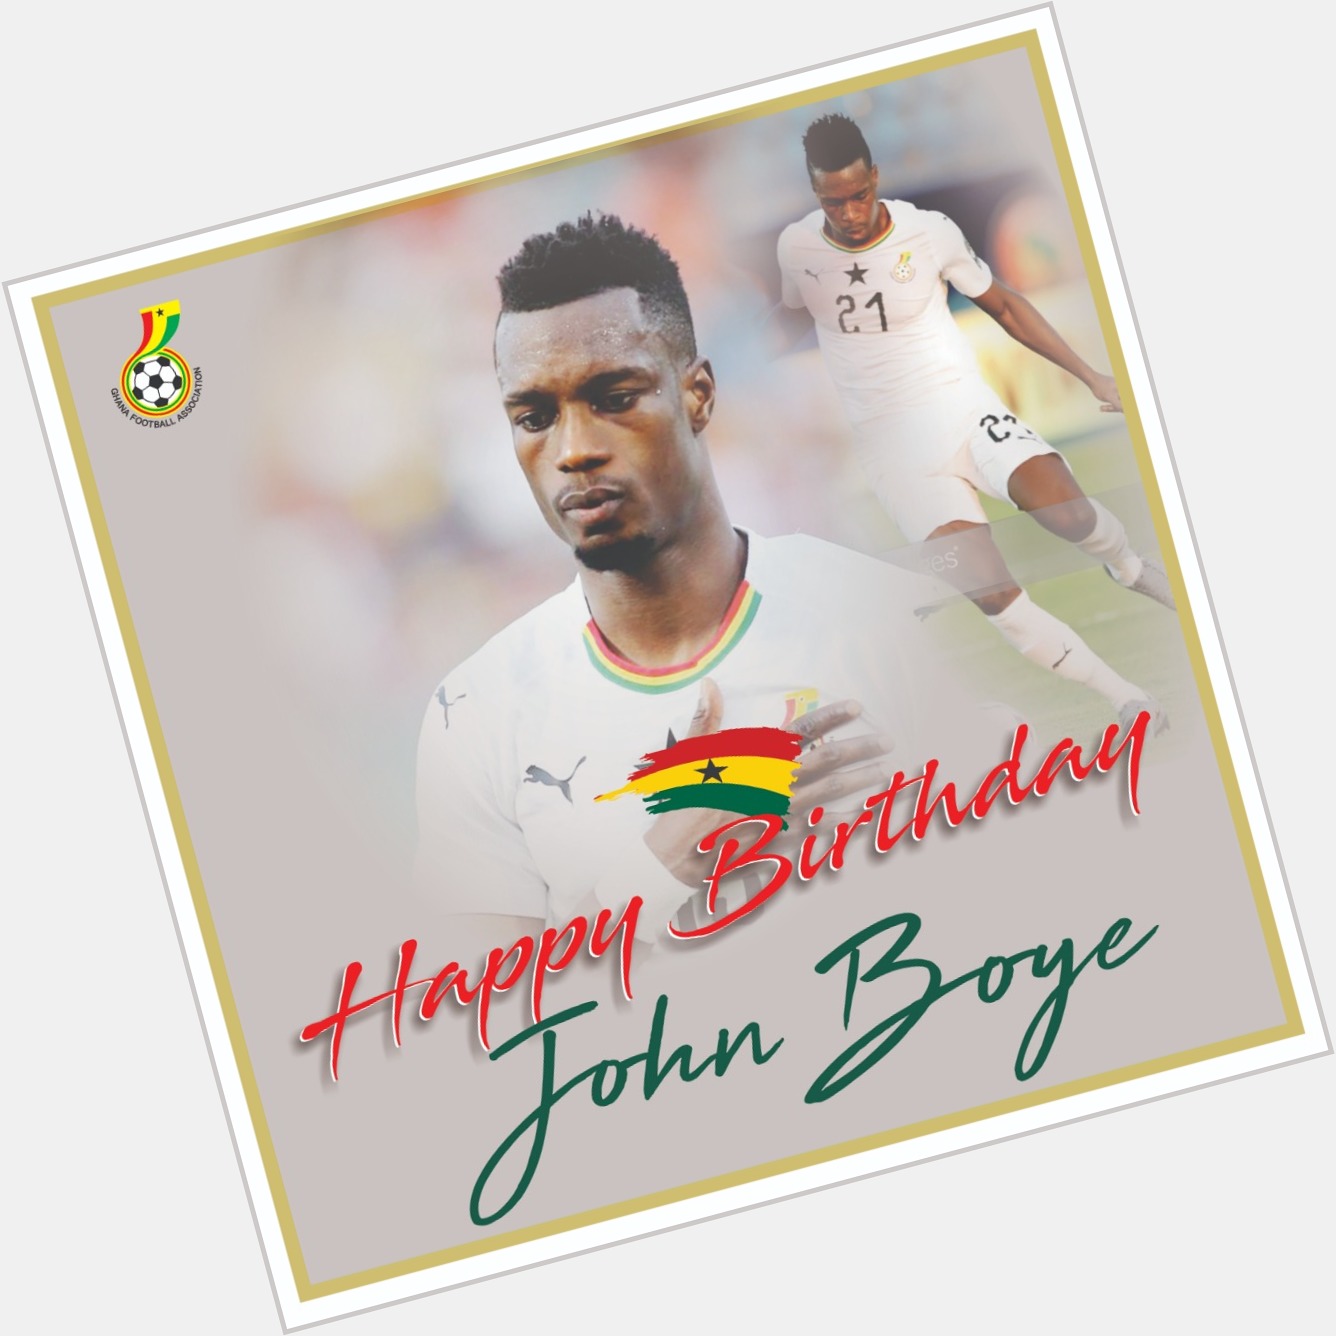 A special Happy Birthday from the GFA to John Boye. 

I wish you same champion defender 